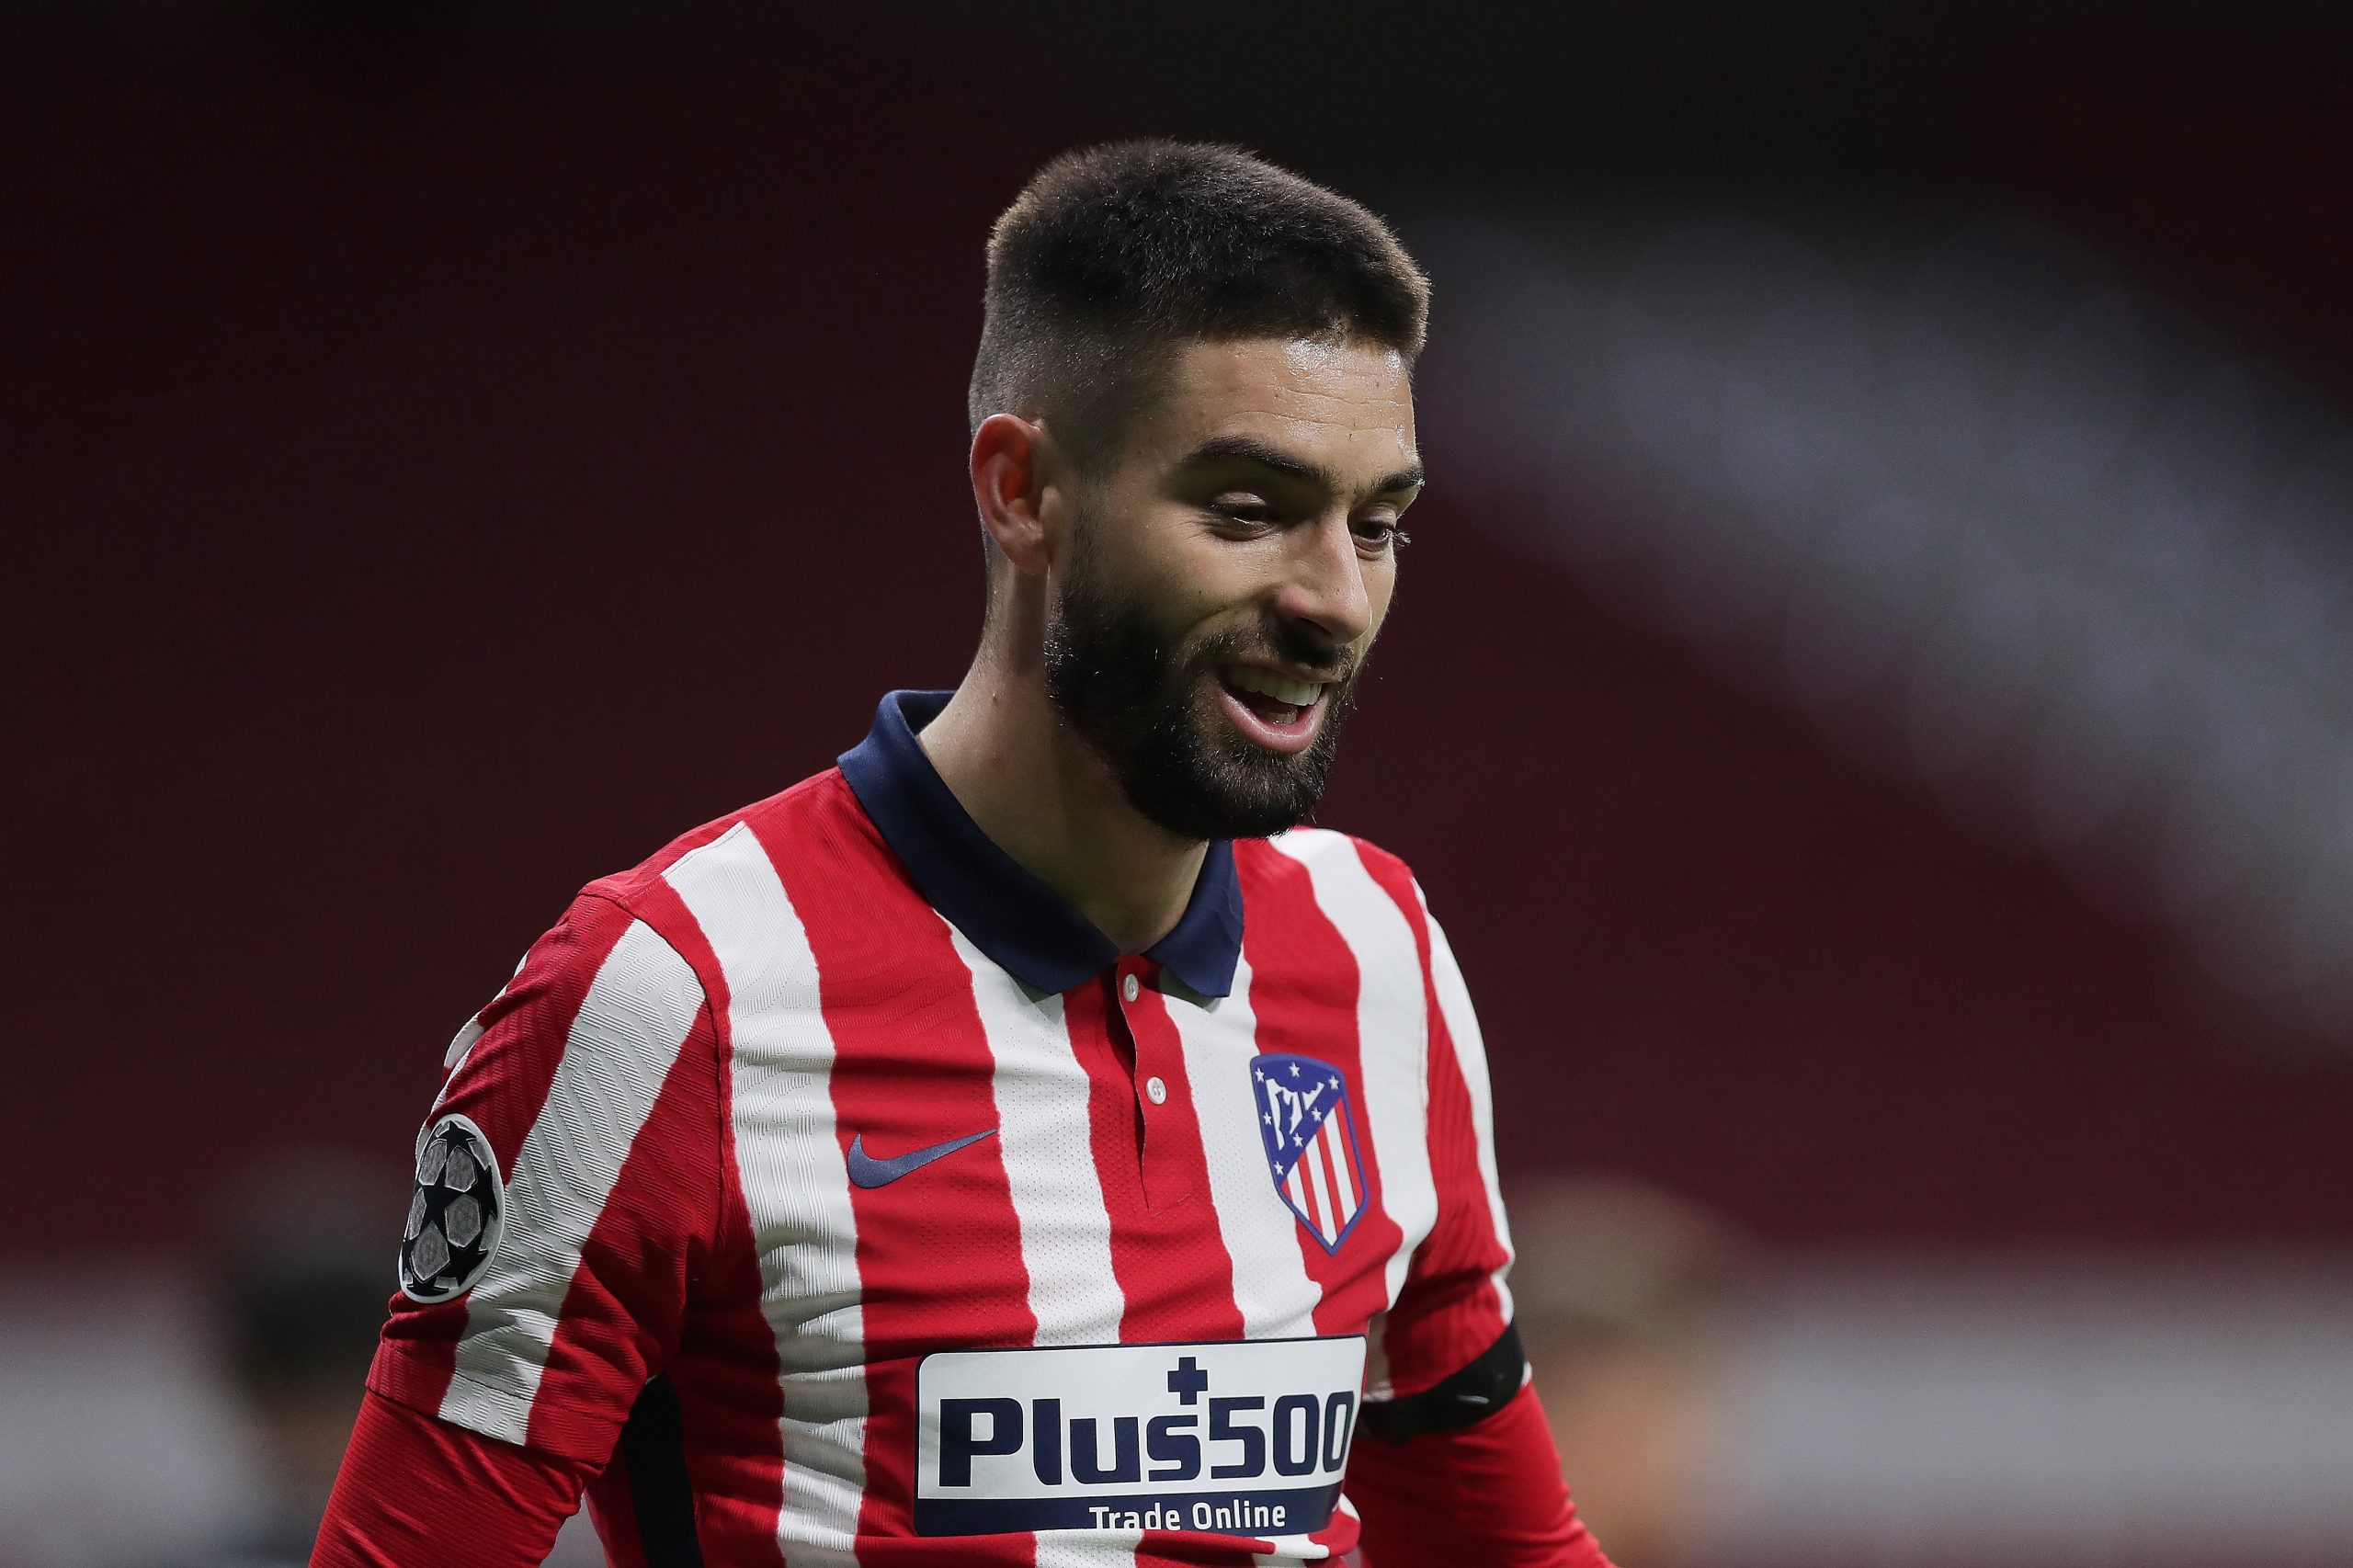 Yannick Carrasco in action for Atletico Madrid. (GETTY Images)